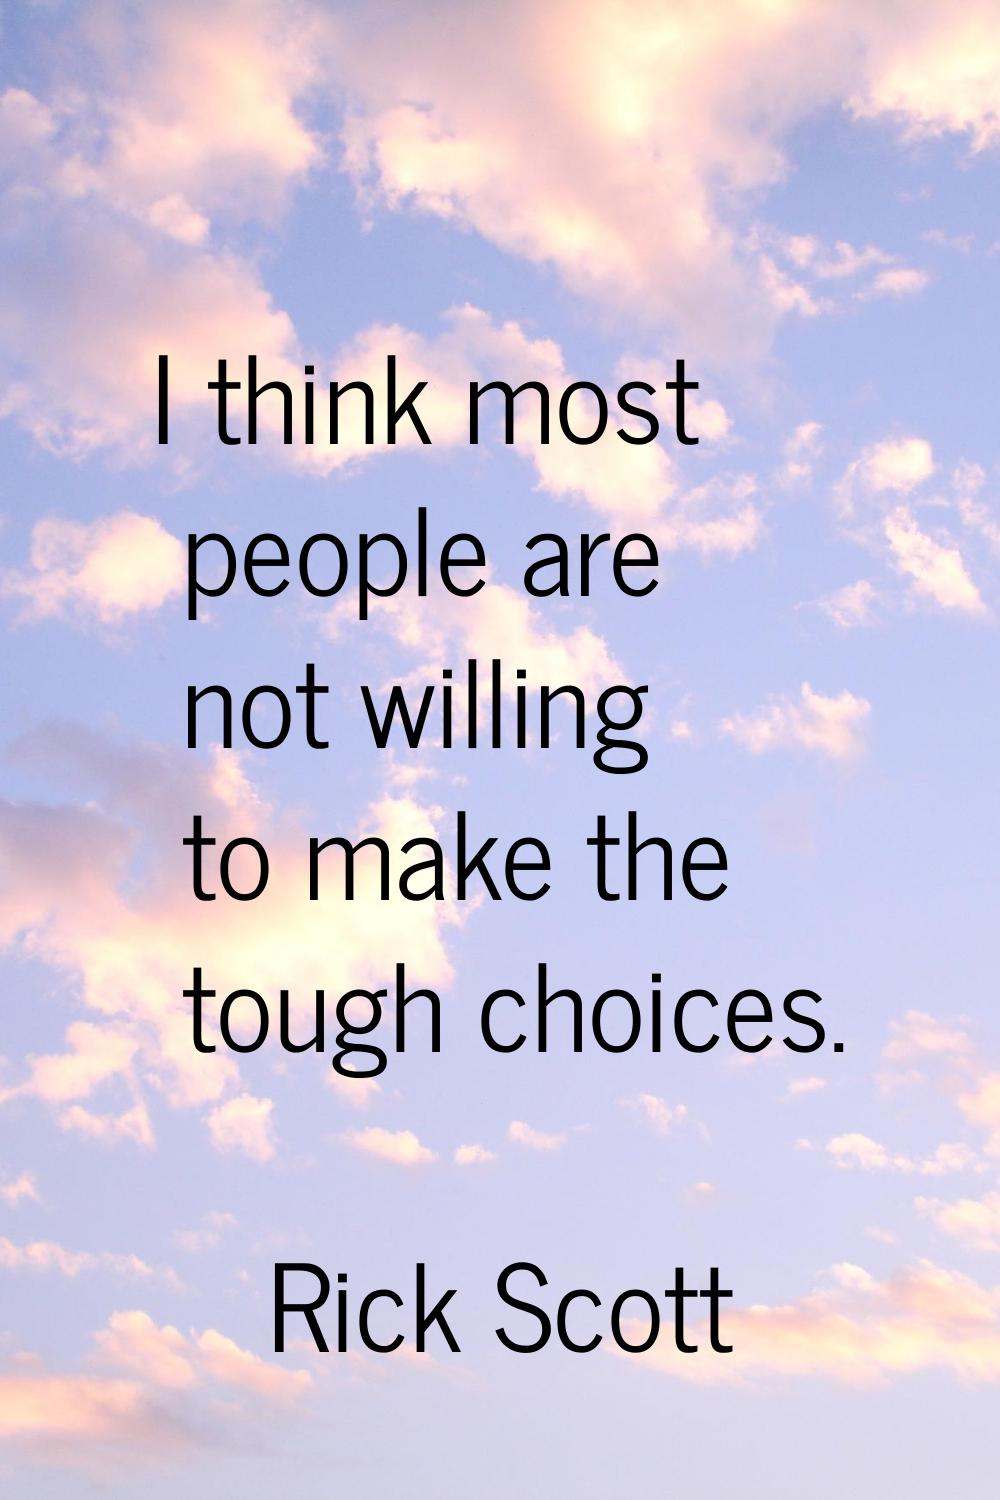 I think most people are not willing to make the tough choices.